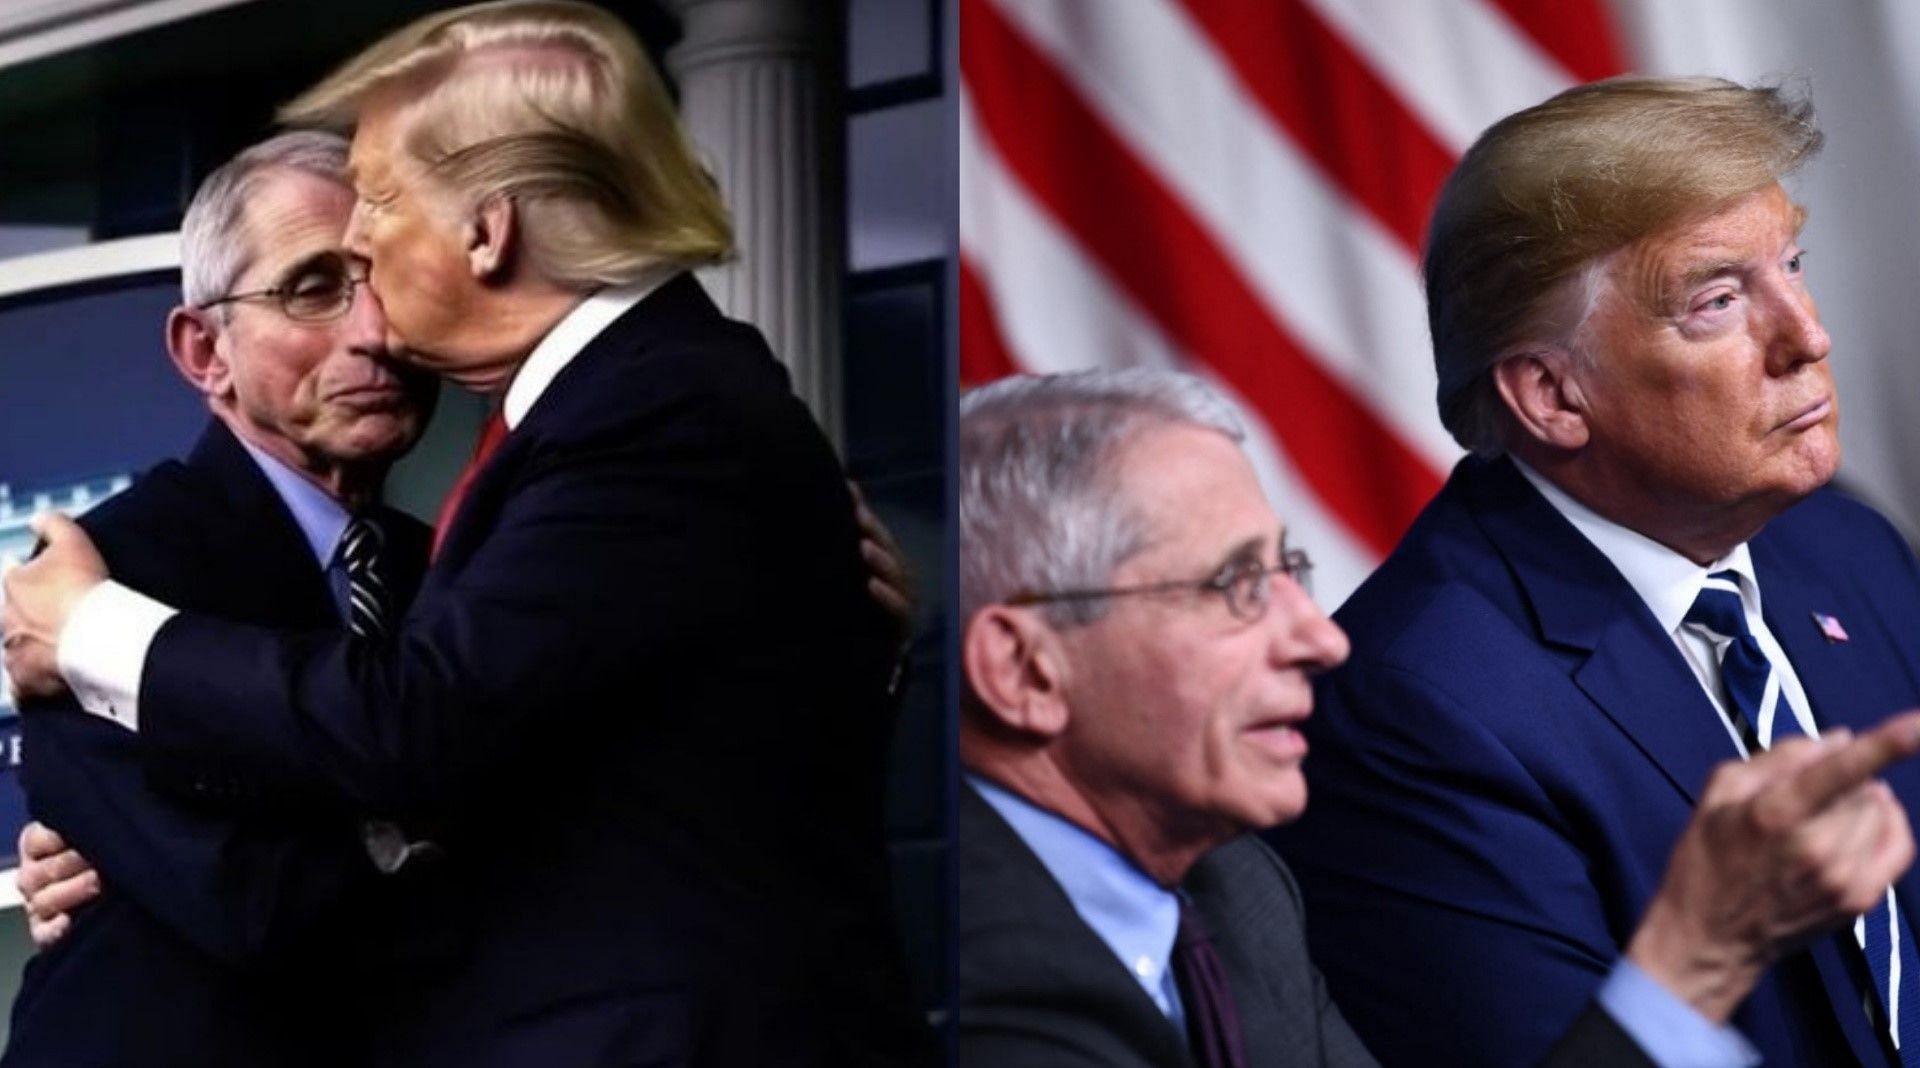 Image of Donald Trump embracing Anthony Fauci takes the internet by a storm (Image via DeSantisWarRoom/Twitter)